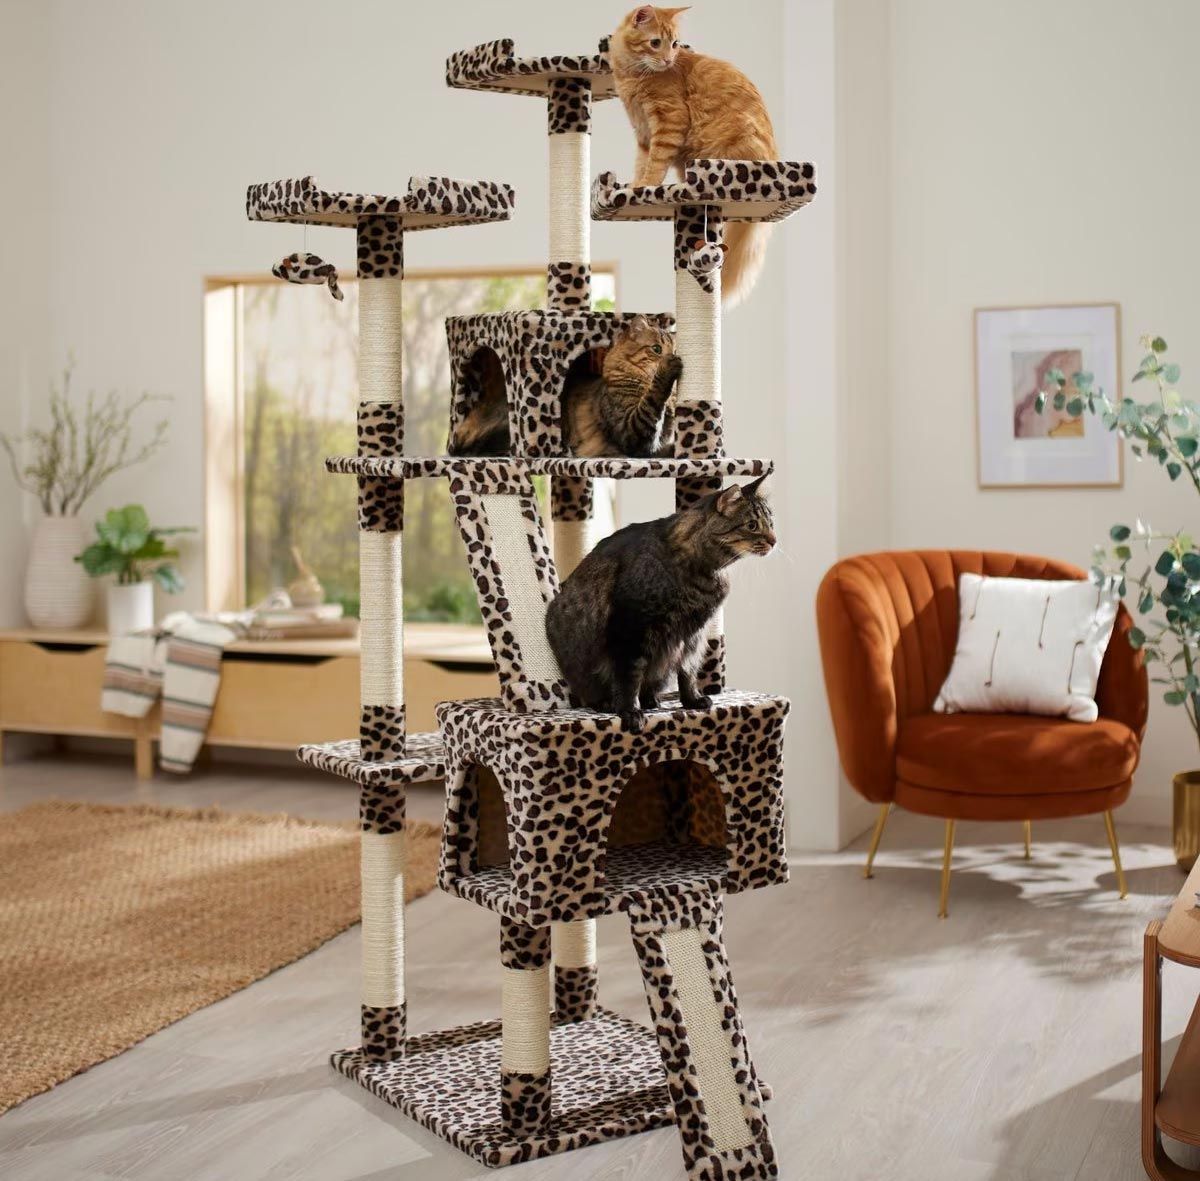 two cats are sitting on a cat tree in a living room